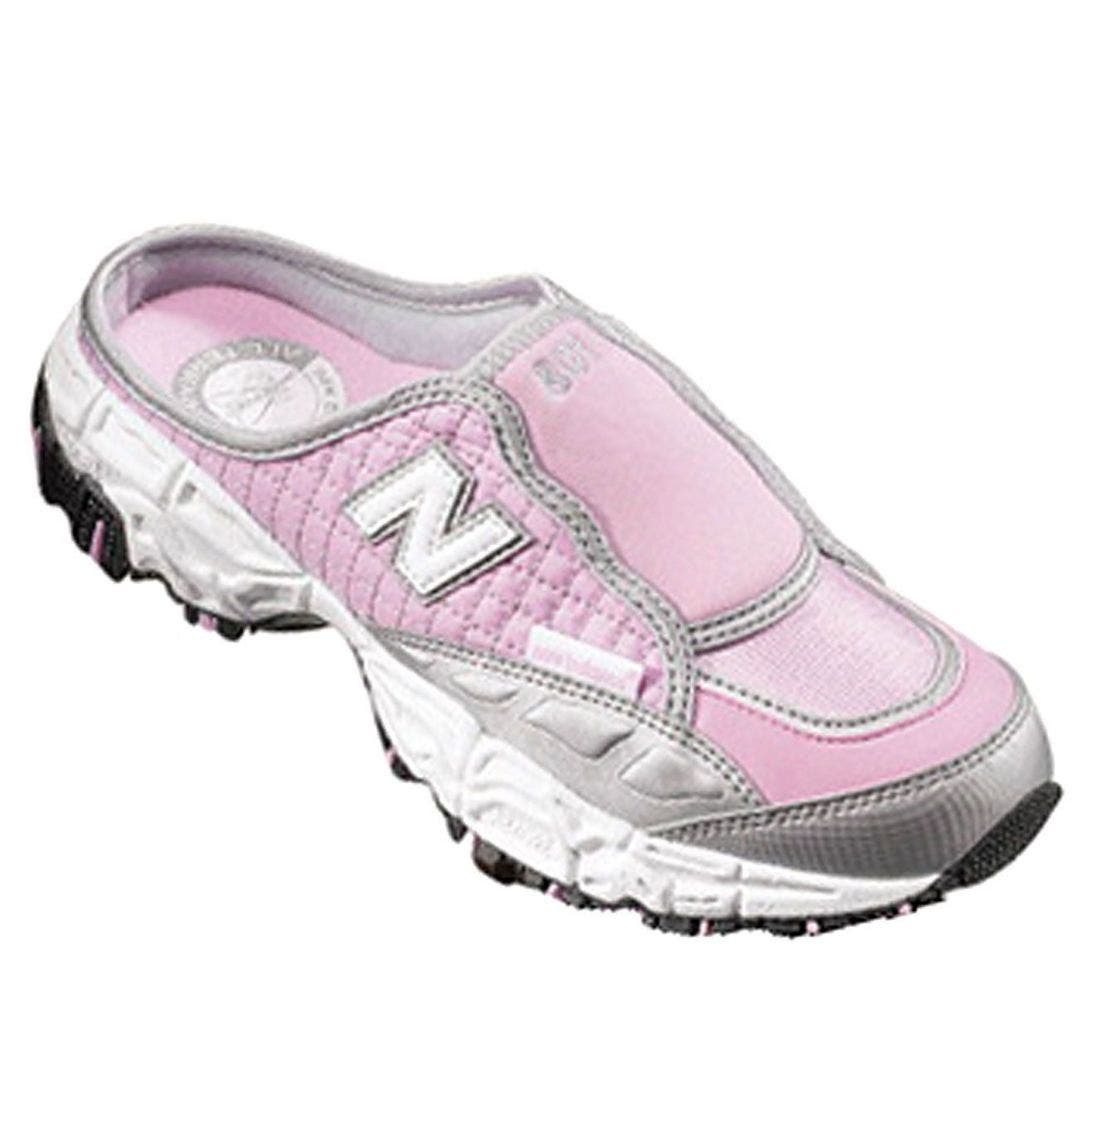 new balance mules 801 Sale,up to 50 